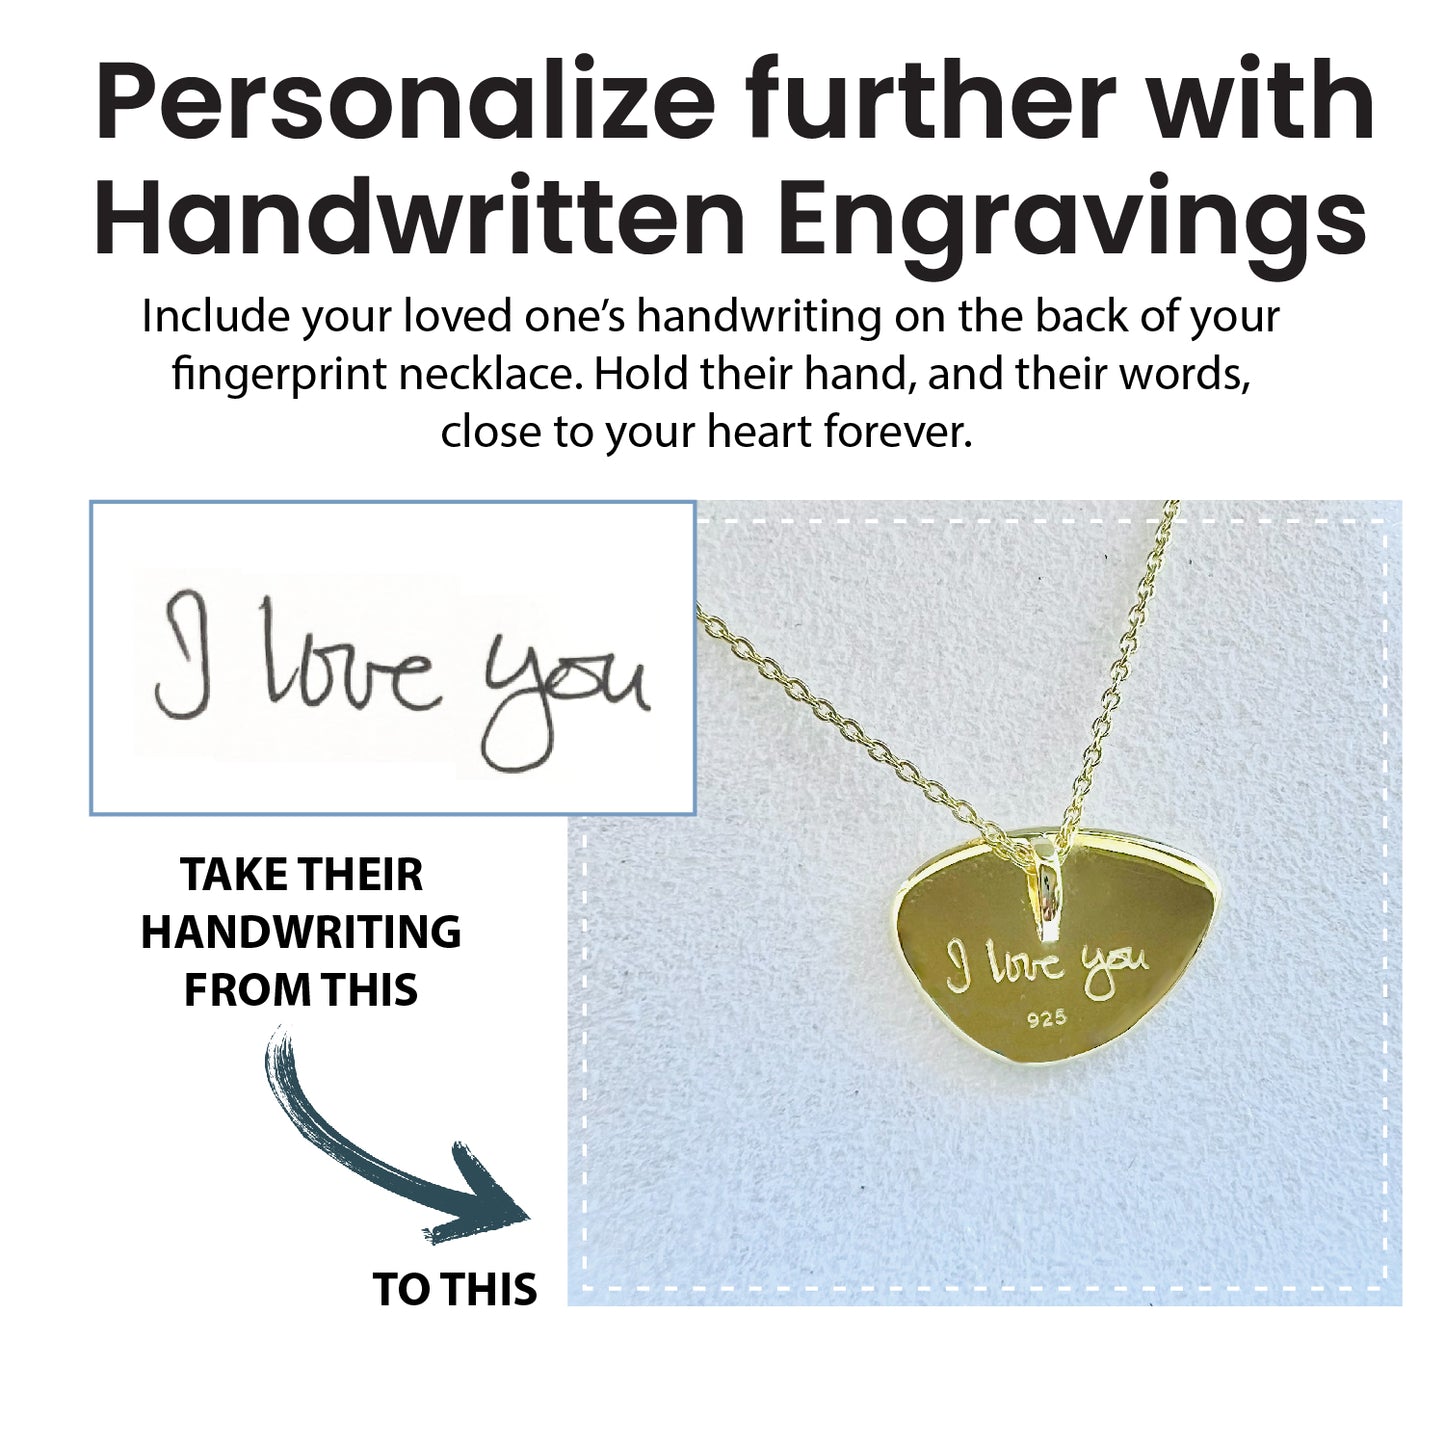 Load image into Gallery viewer, The Love 14K Gold + Diamonds
